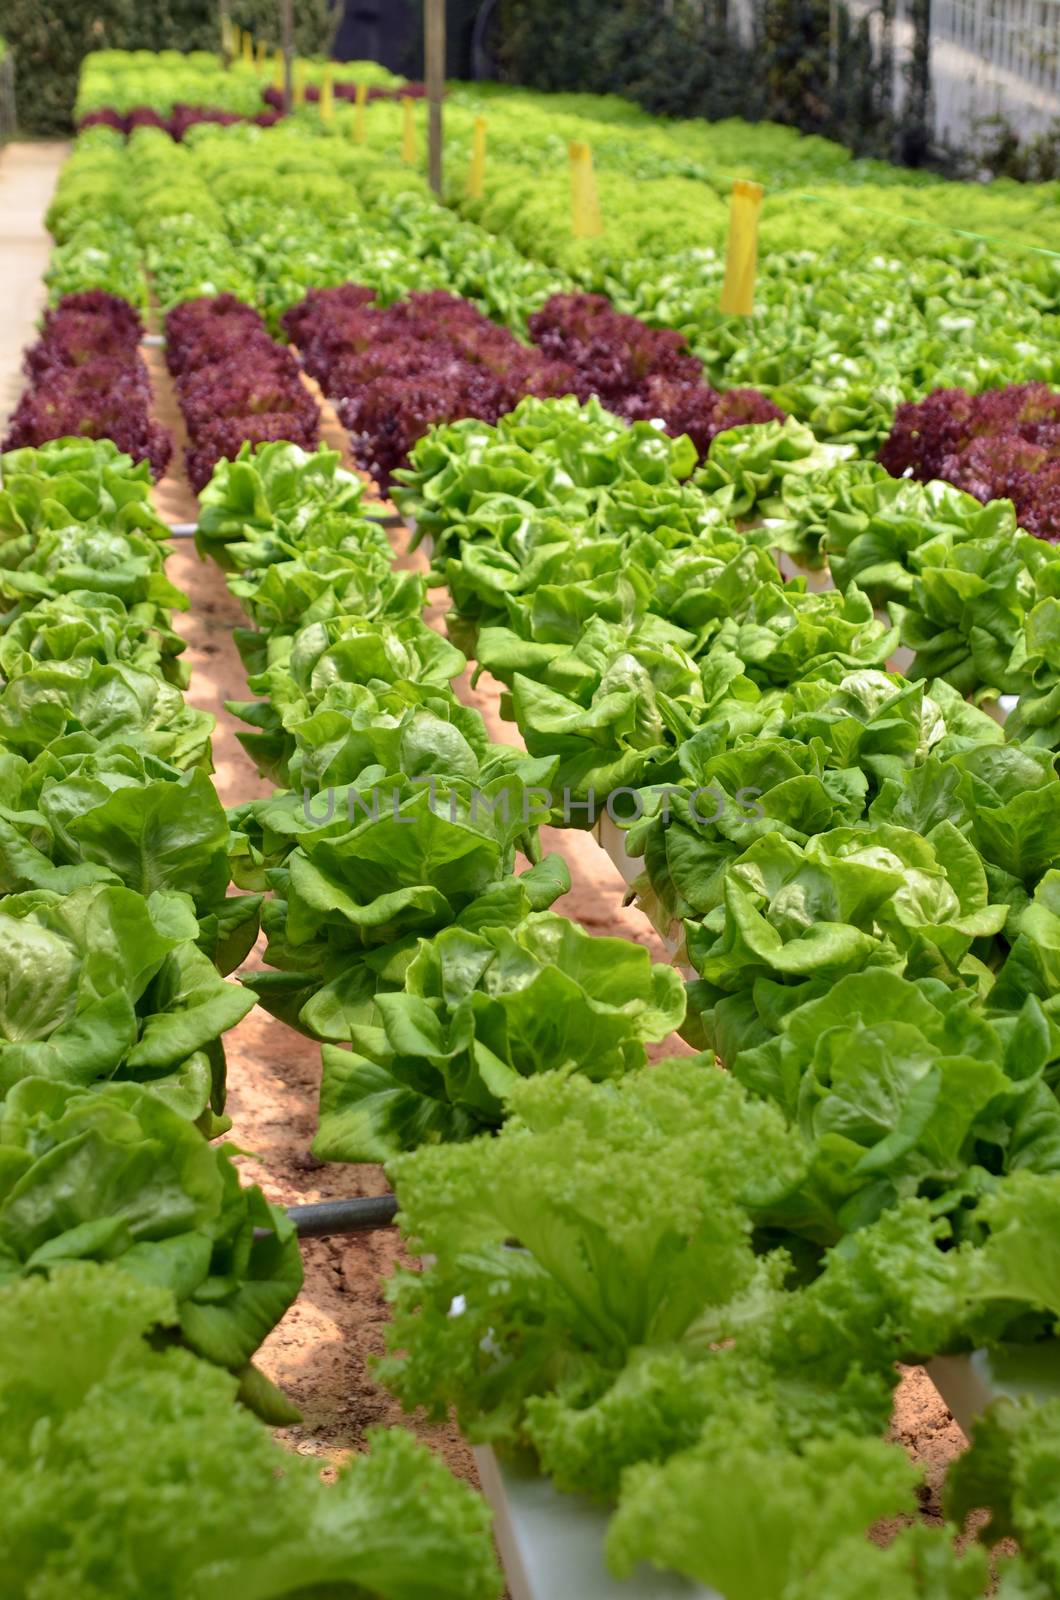 Hydroponic lettuce in greenhouse. The hydroponic greenhouse production system was designed for small operation